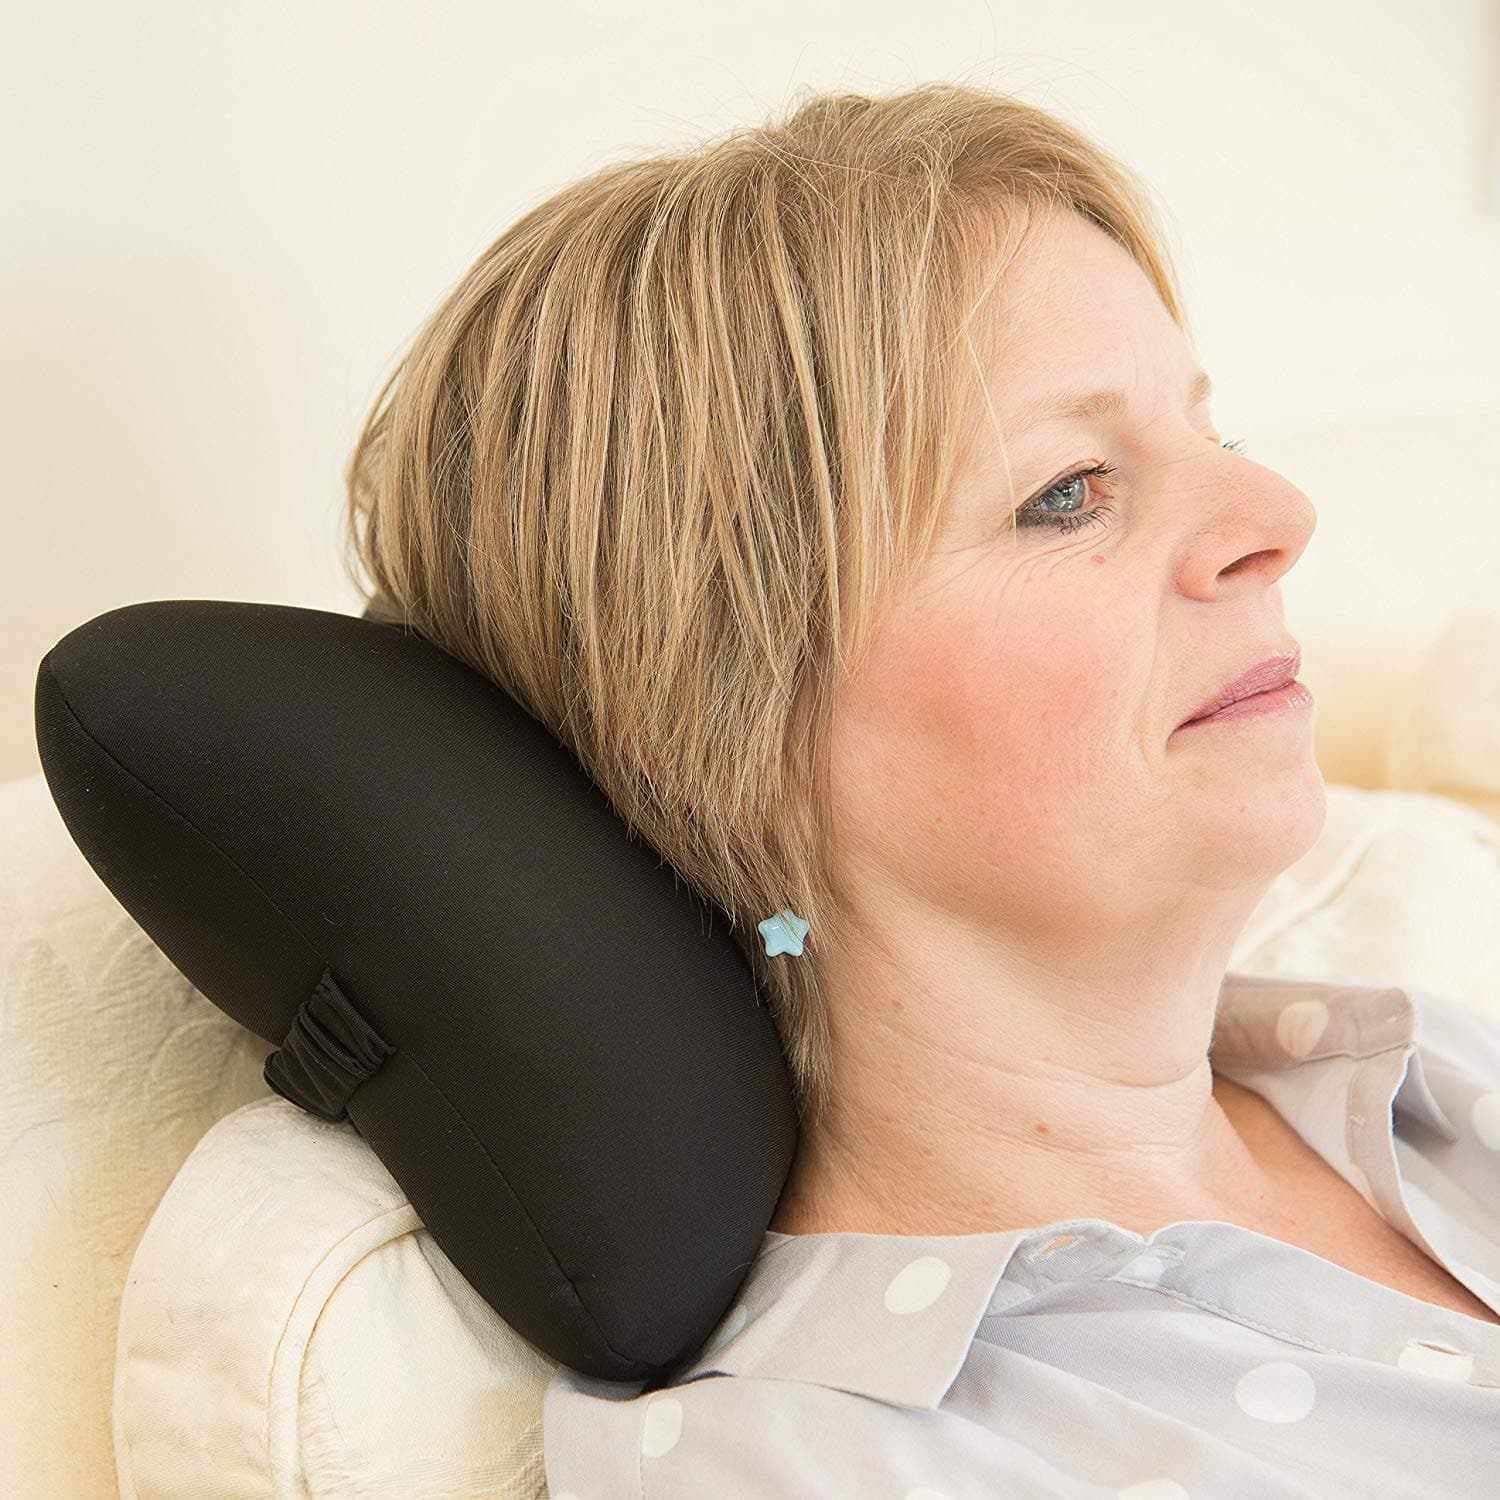 Vibrating pillow cushtie cushion, From calming to arousing, Vibrating pillow cushtie cushion's are becoming a popular way to provide tactile input. An added feature to these Vibrating pillow cushtie cushion is that they have a elastic feature that allows you to fit it to a car head rest or wheelchair head rest with ease giving the ultimate in sensory massage on the go. Vibration has many therapeutic benefits for people of all ages, with or without disabilities or sensory processing disorders. These pillows 